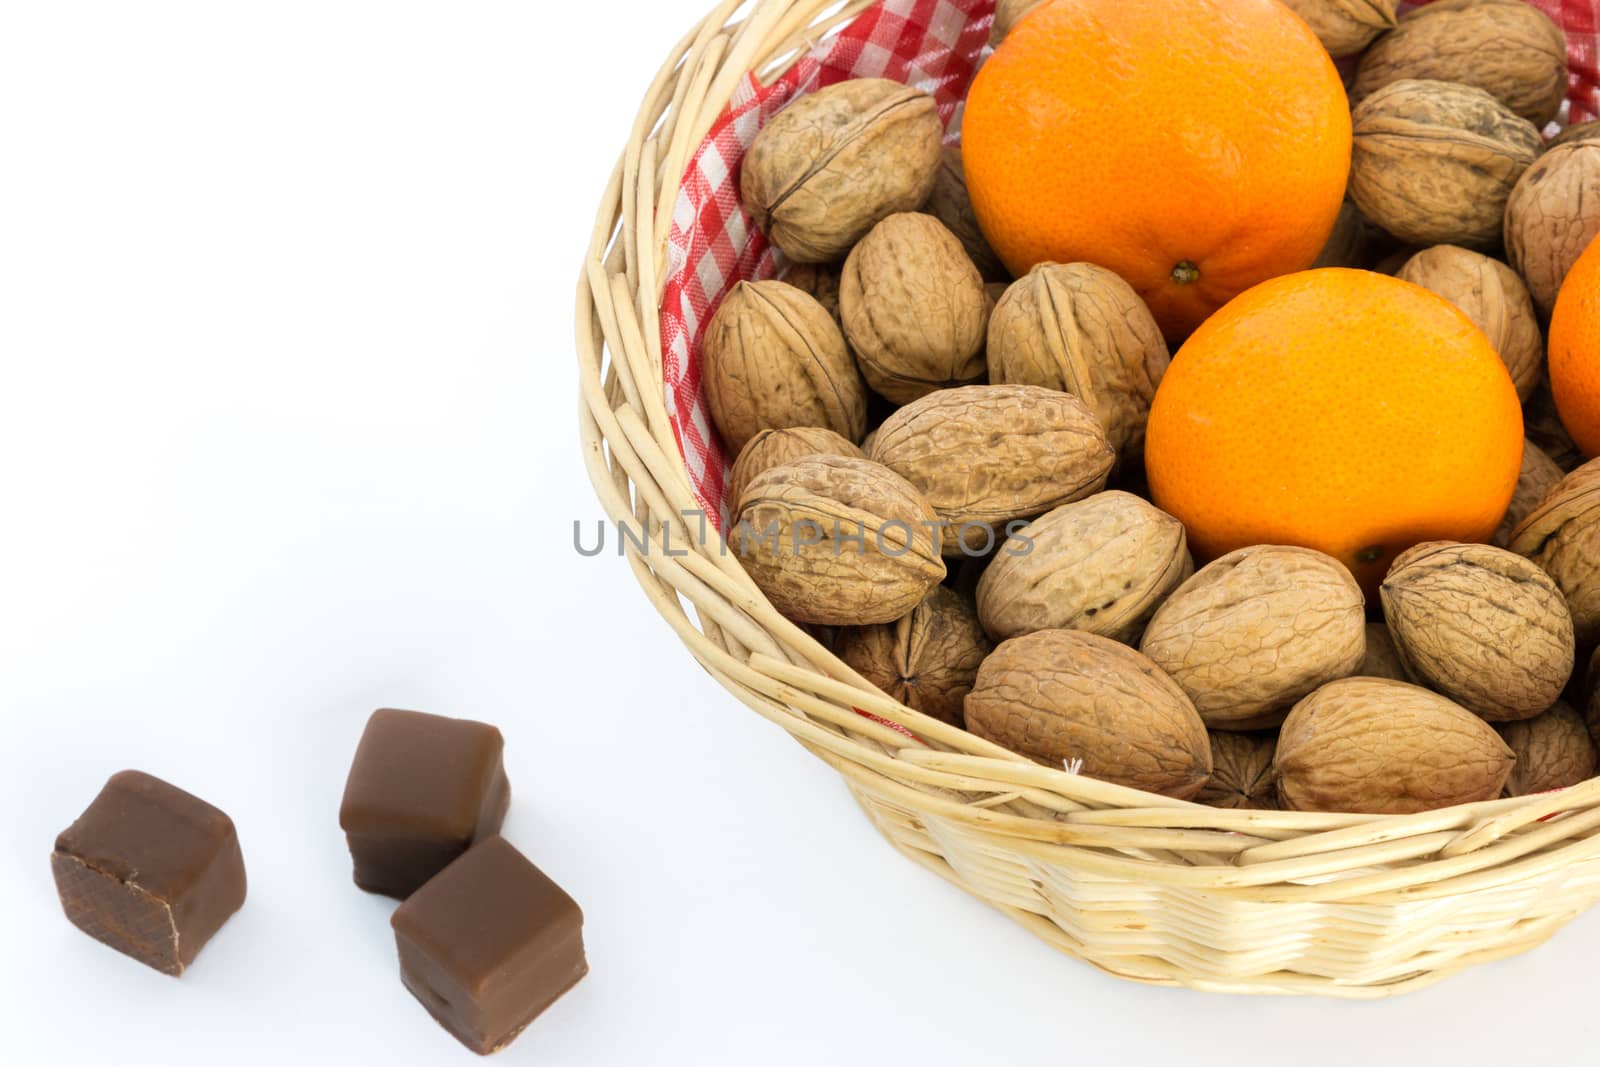 Small basket with walnuts and tangerines, chocolate on the side